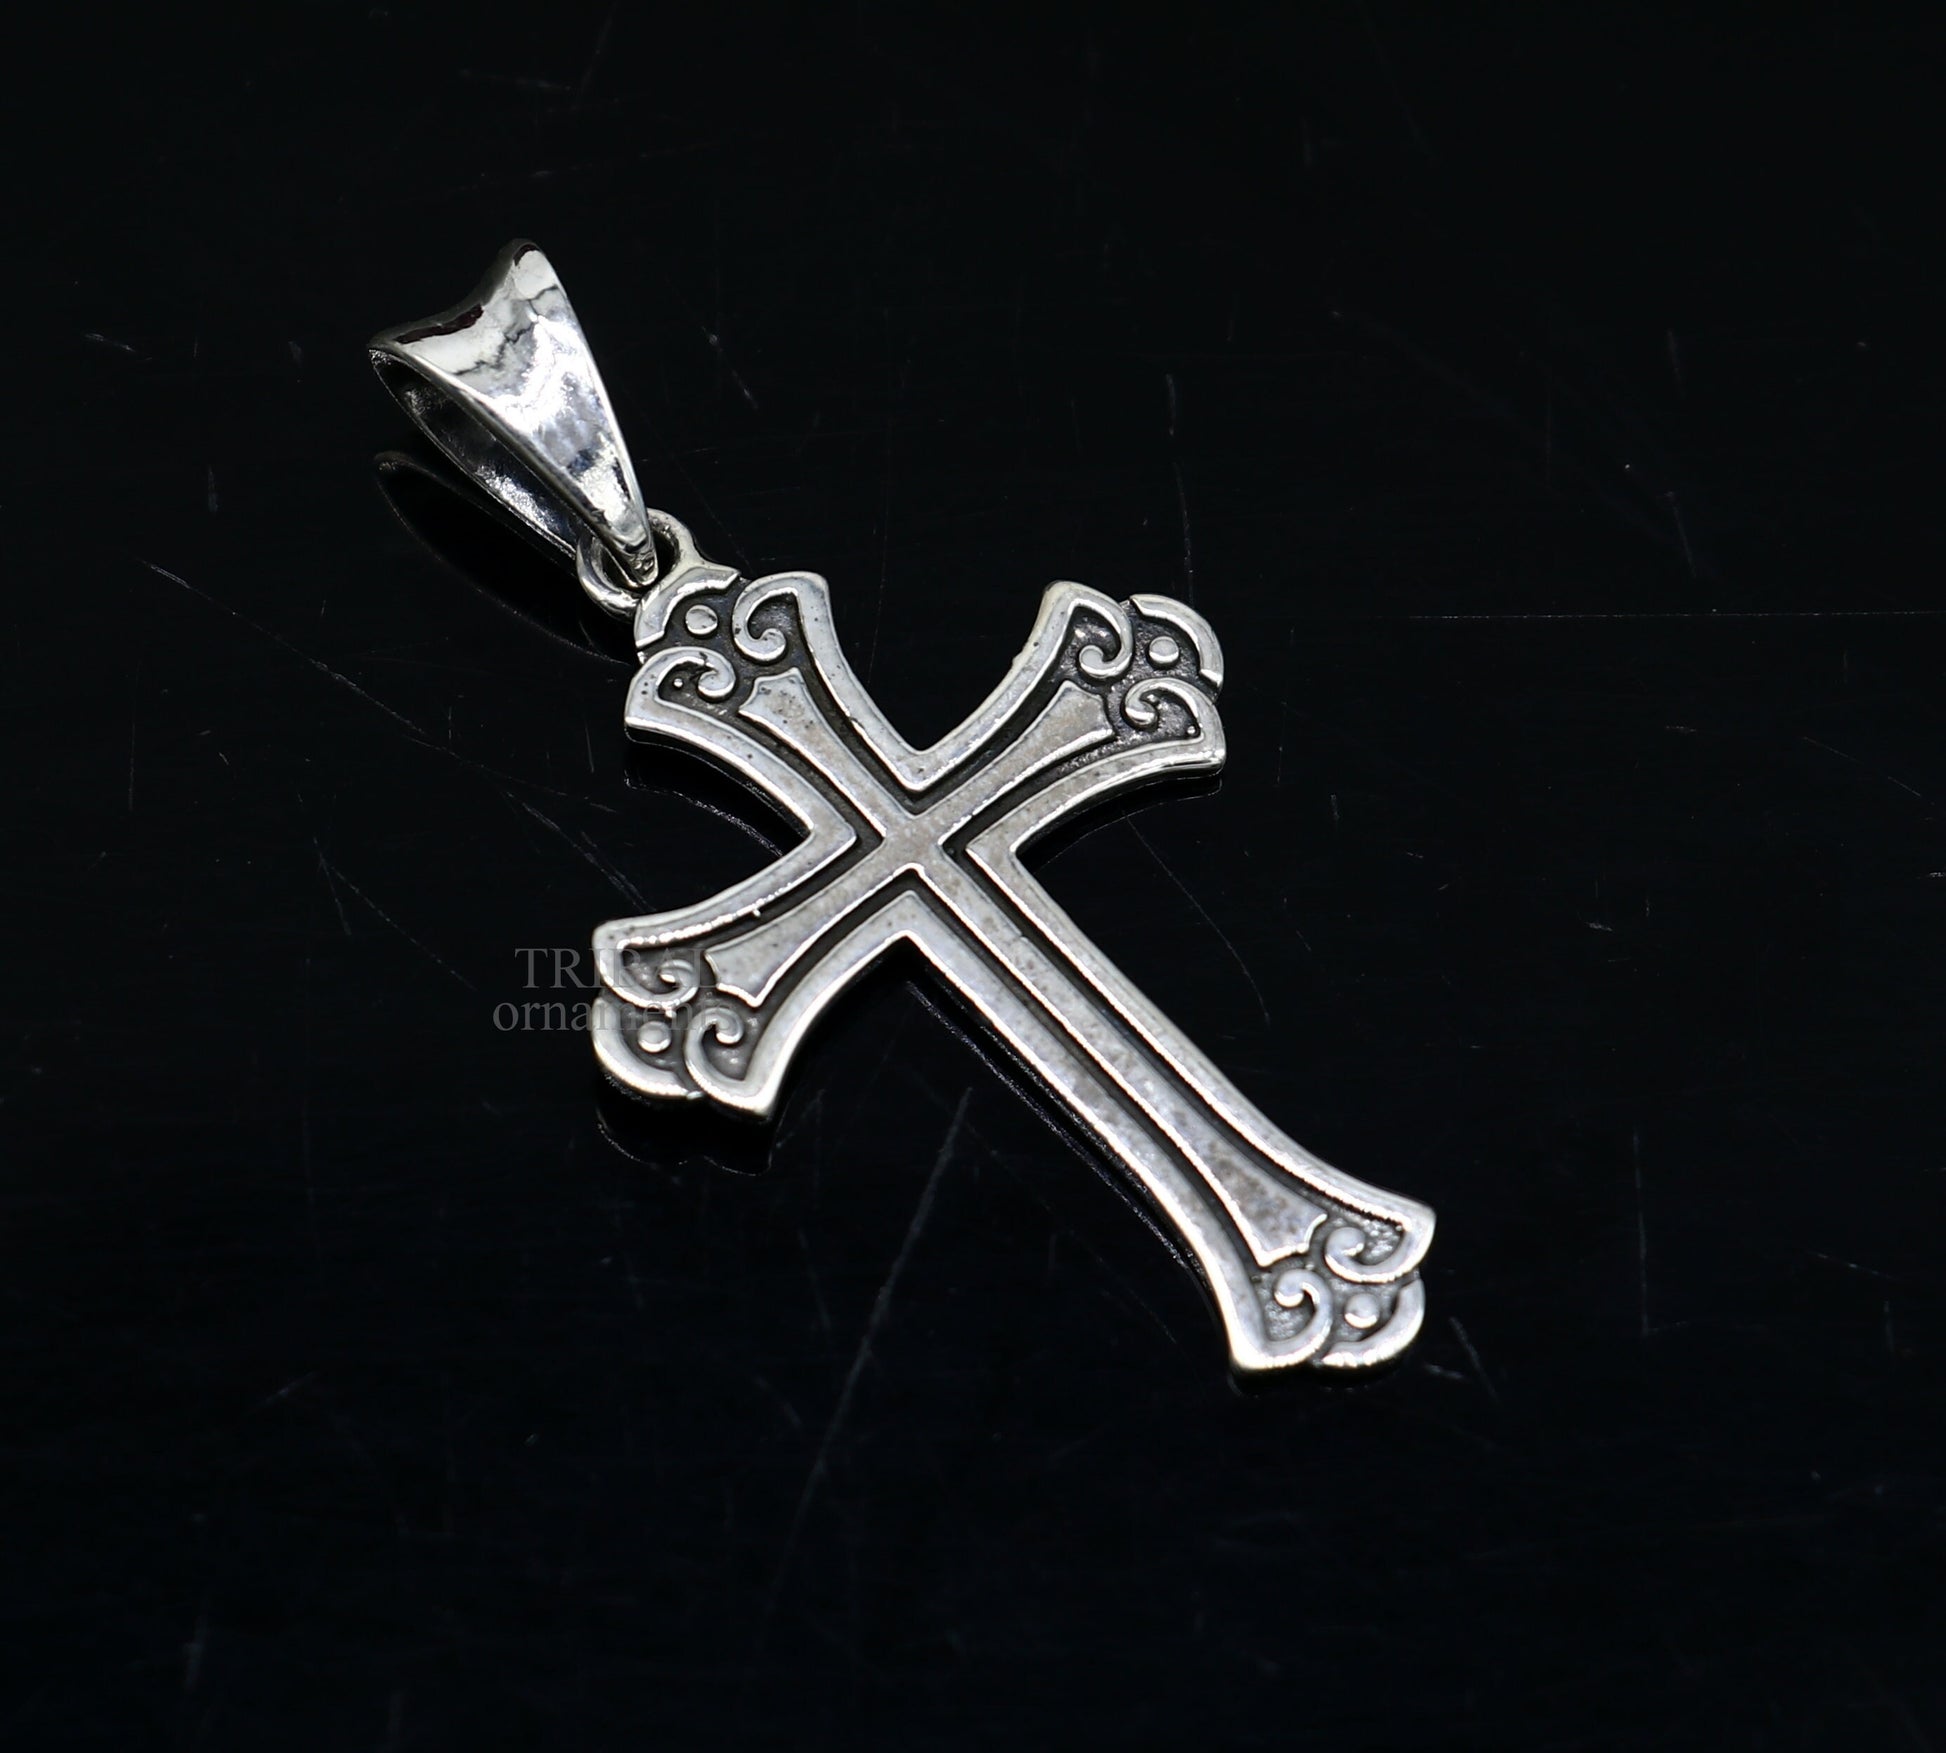 925 sterling silver holy cross pendant, excellent unique design stylish unisex exclusive gift pendant jewelry from india ssp1605 - TRIBAL ORNAMENTS